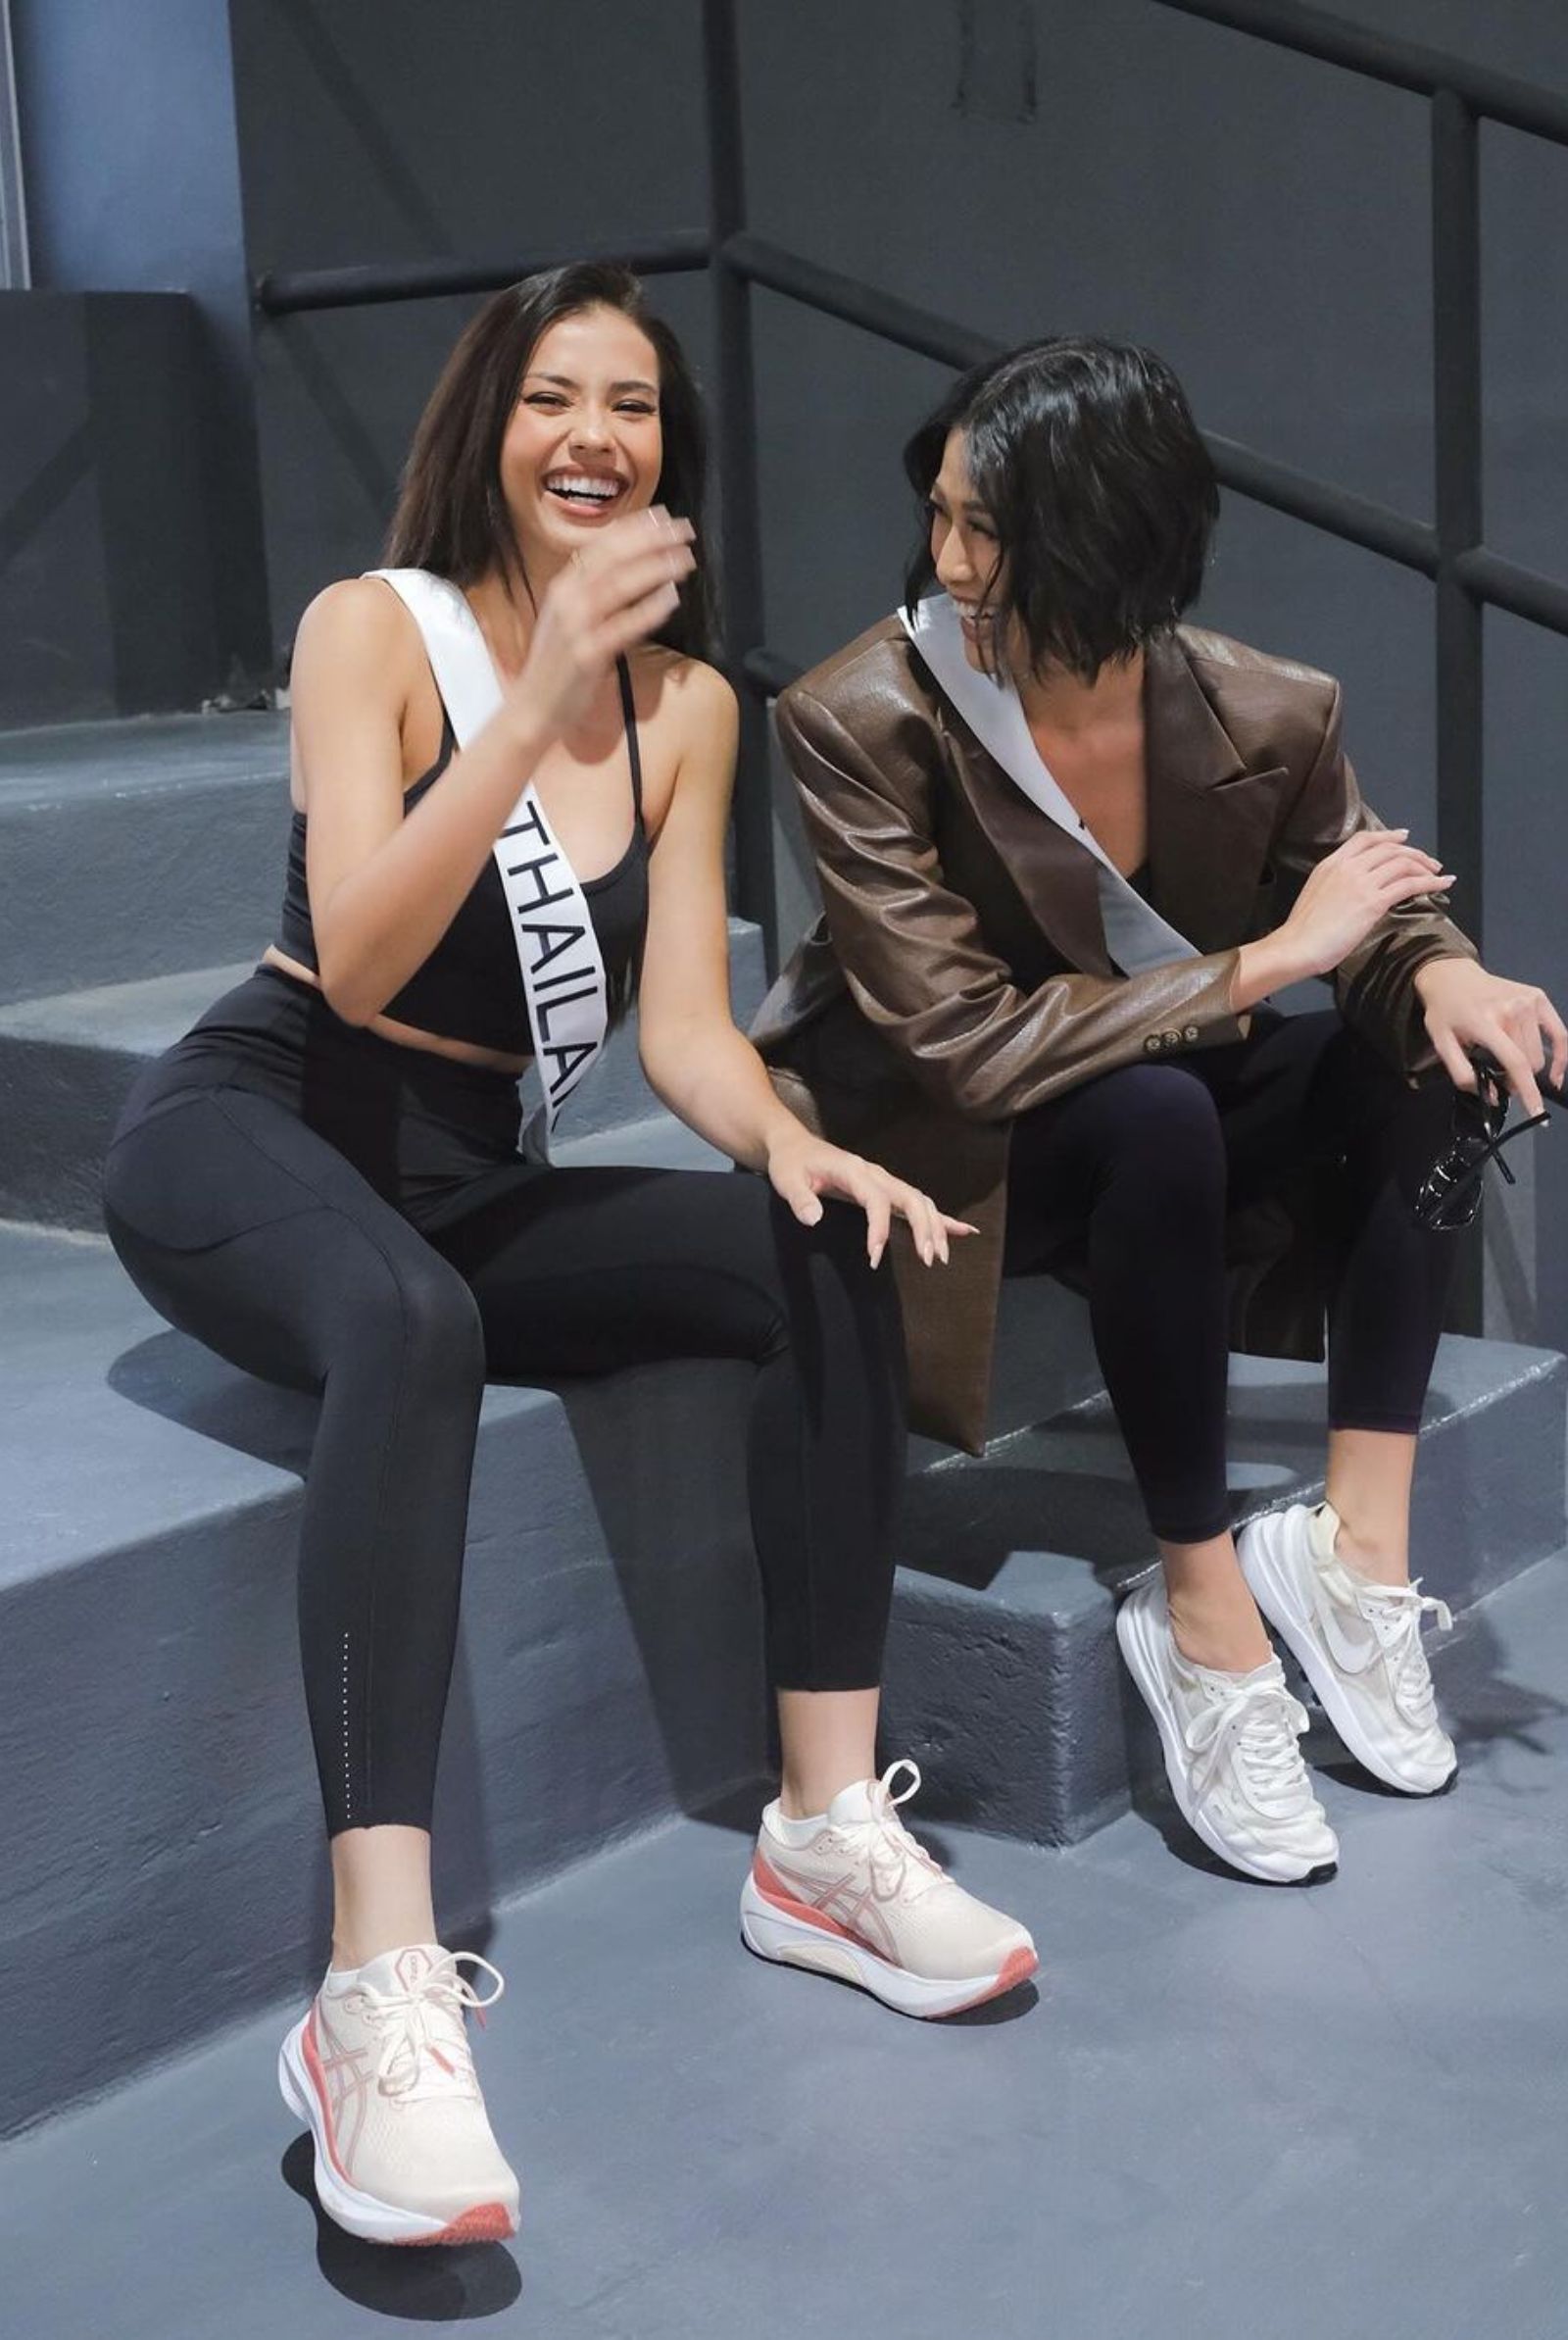 Anntonia Porsild and Michelle Dee share some fun moments at rehearsals